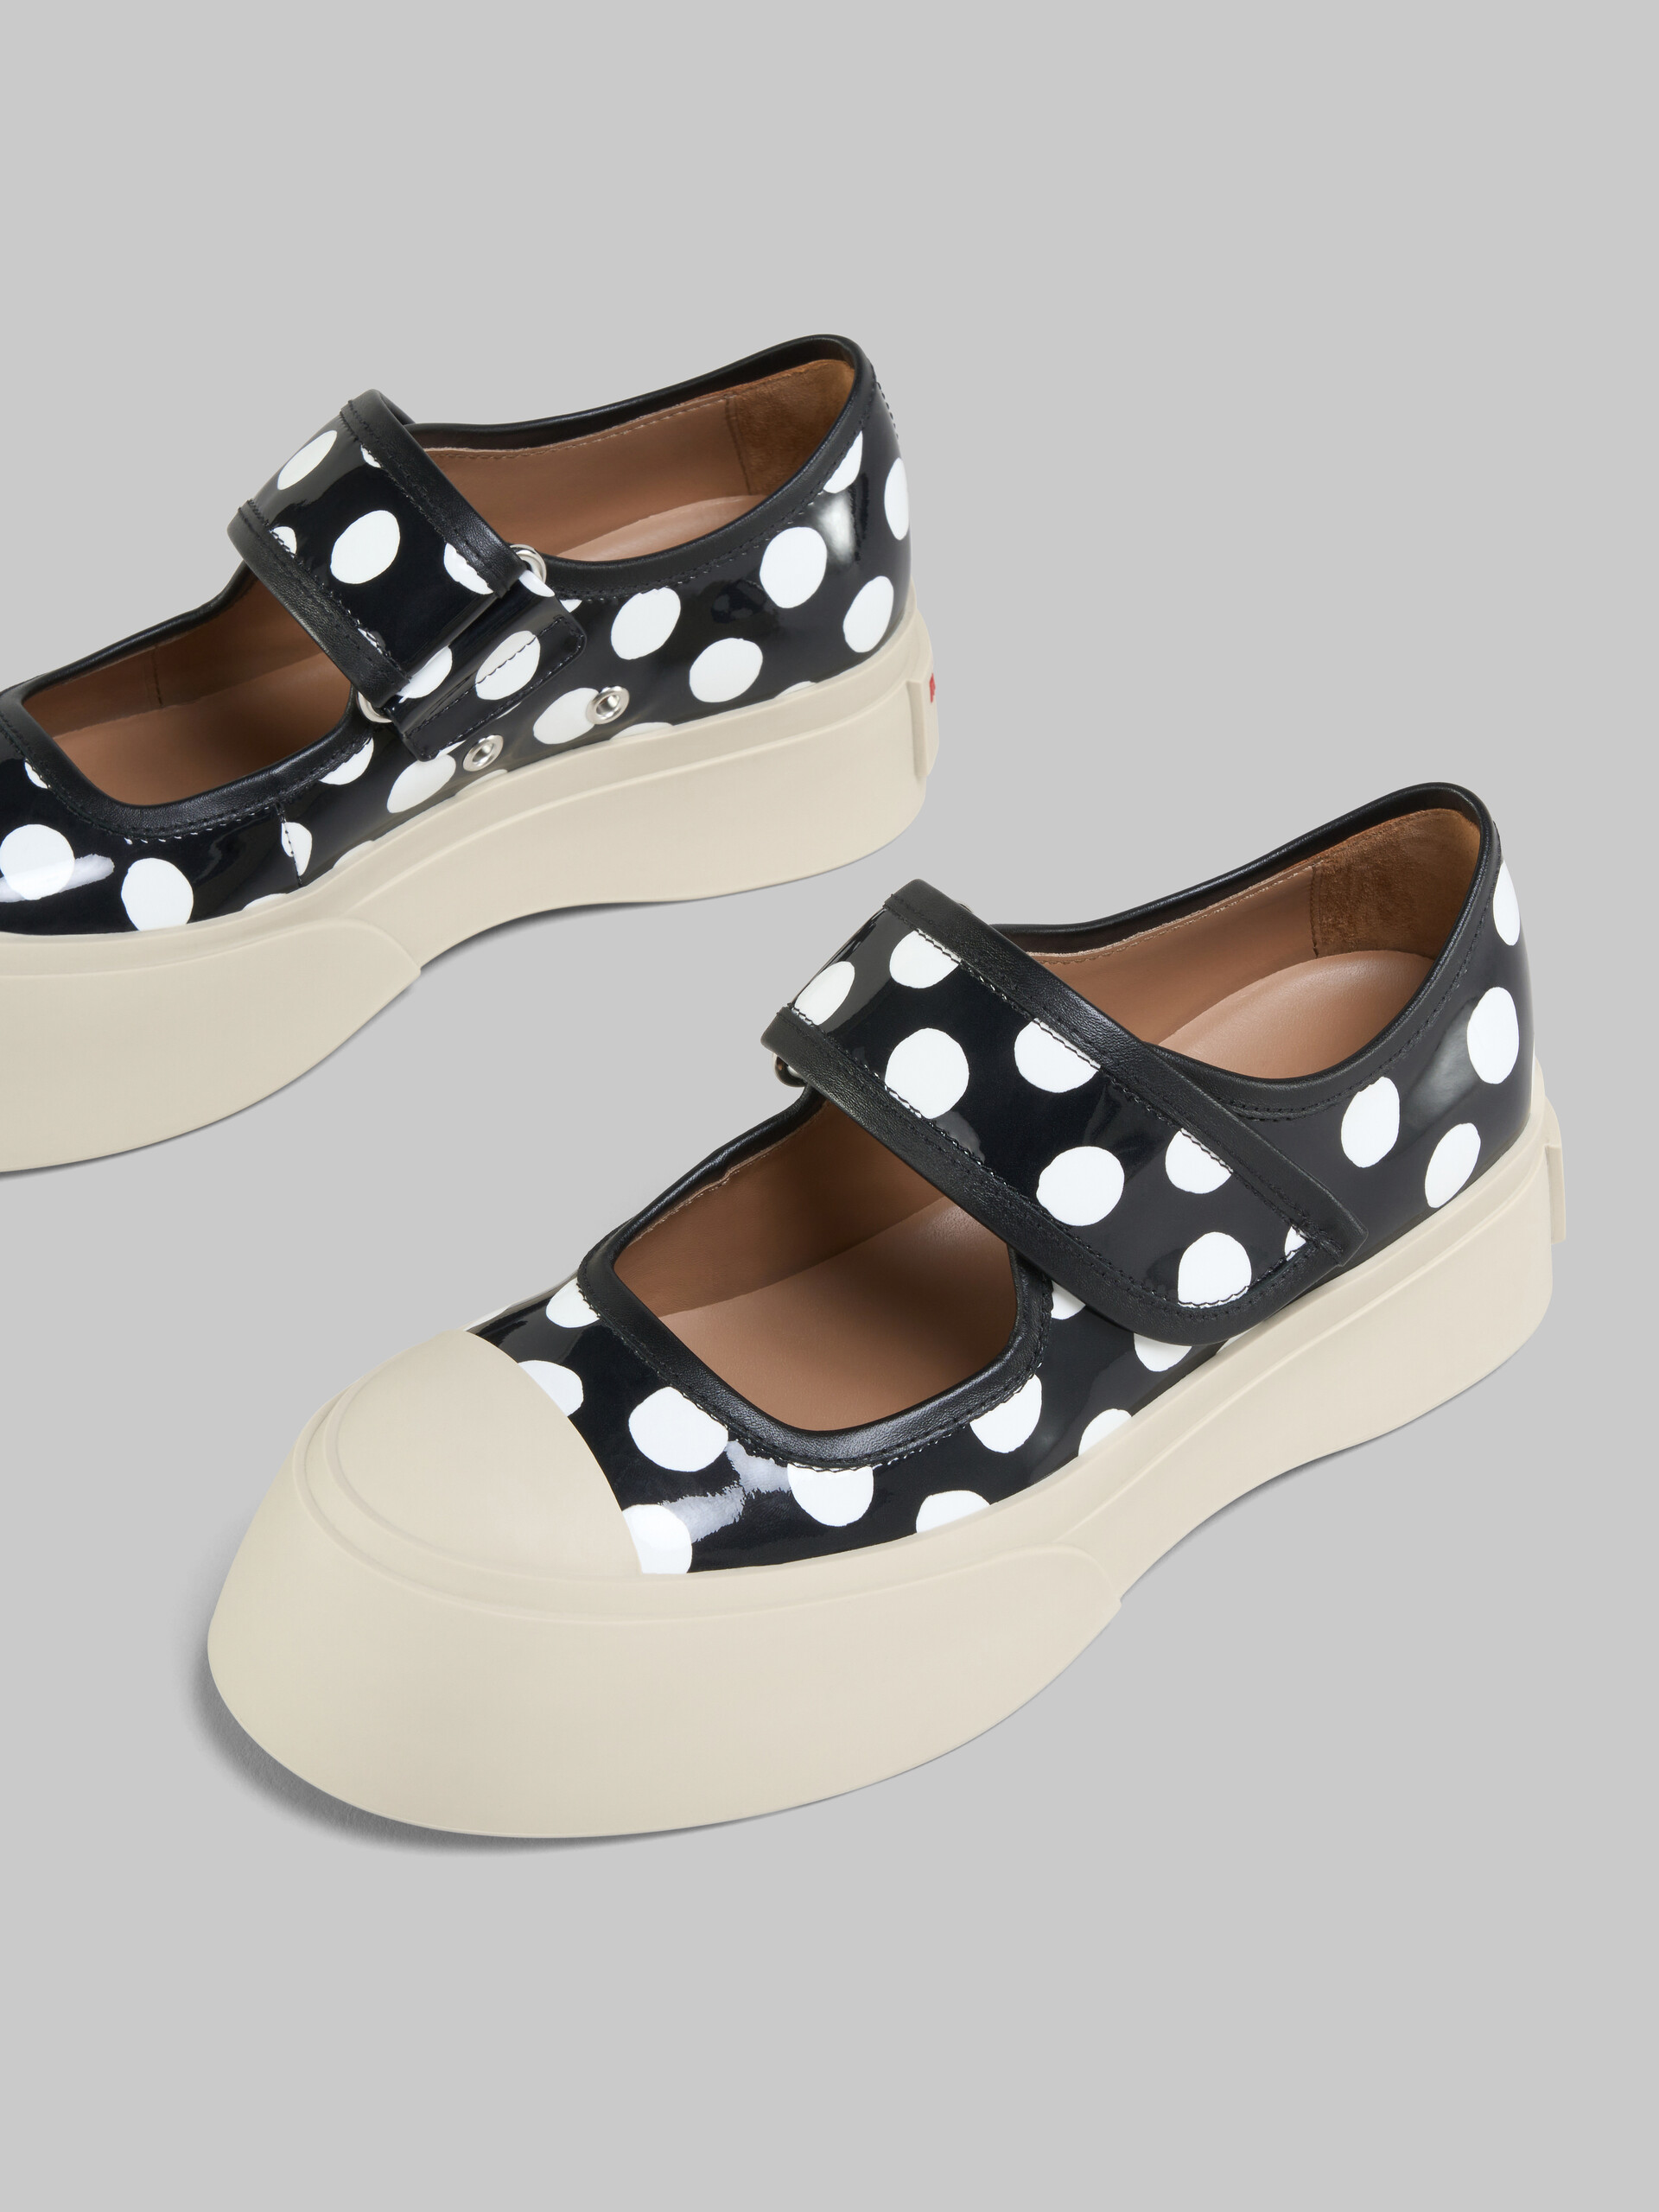 Black and white polka-dot patent leather Pablo Mary Jane sneaker